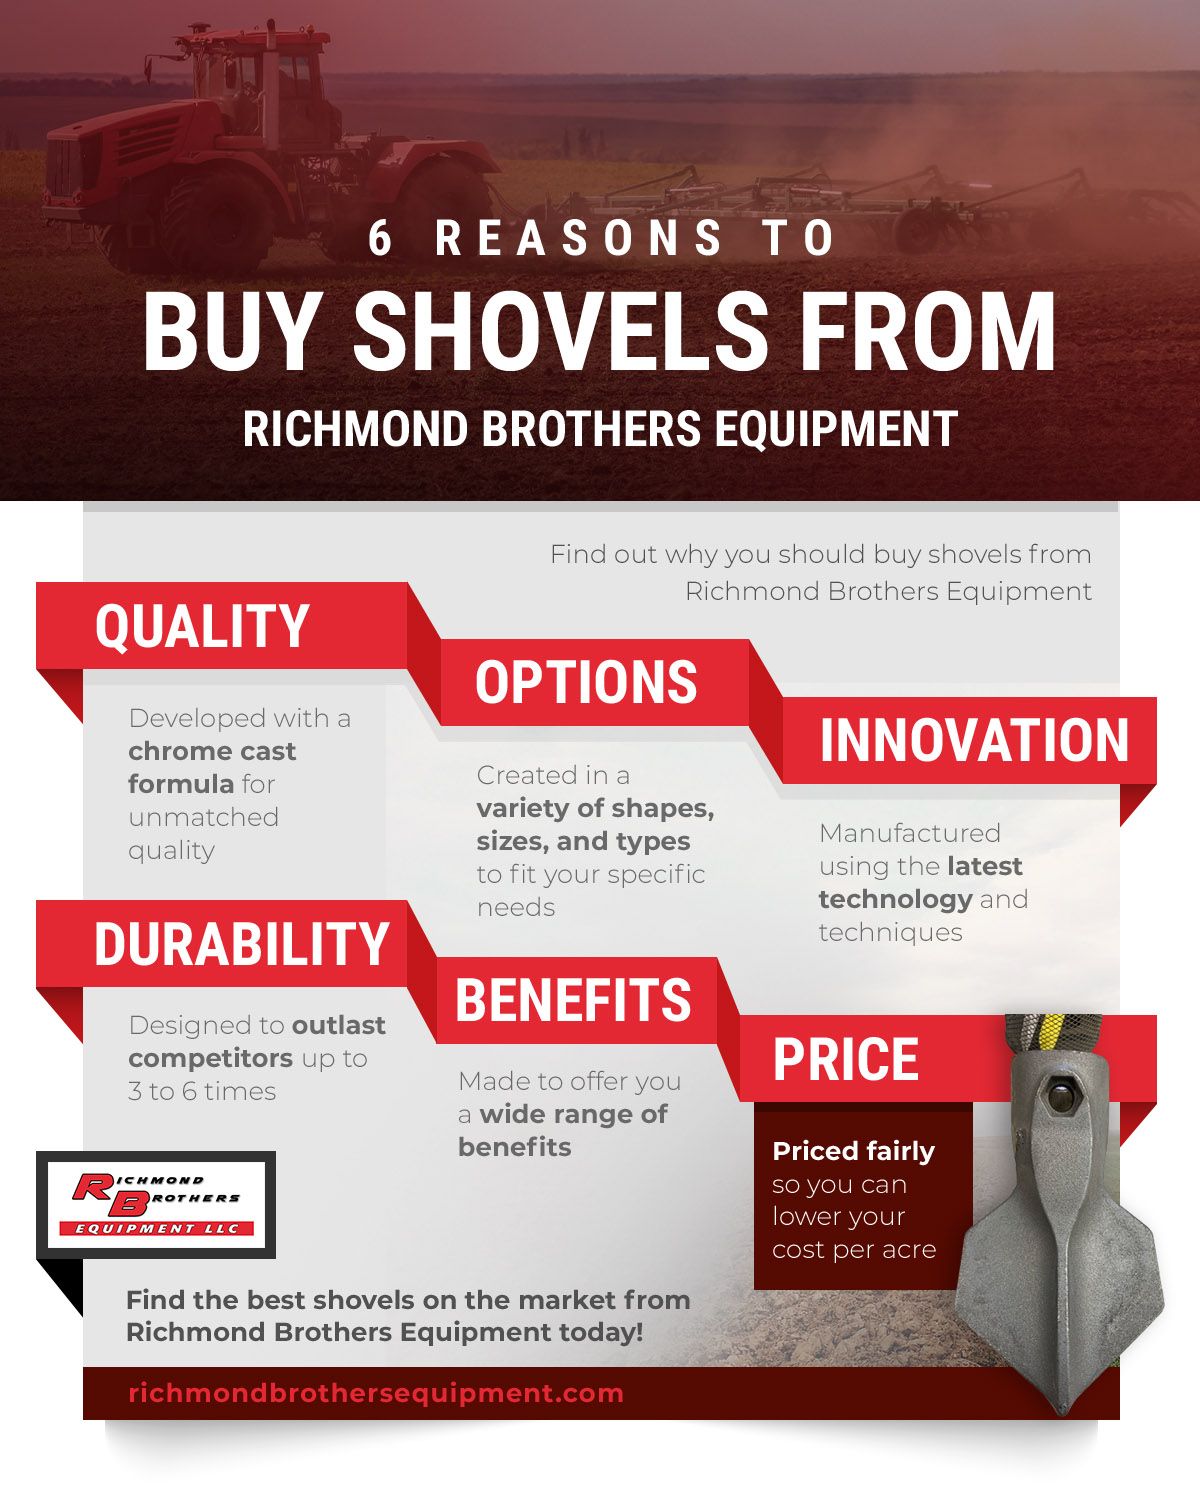 6 Reasons to Buy Shovels From Richmond Brothers Equipment.jpg